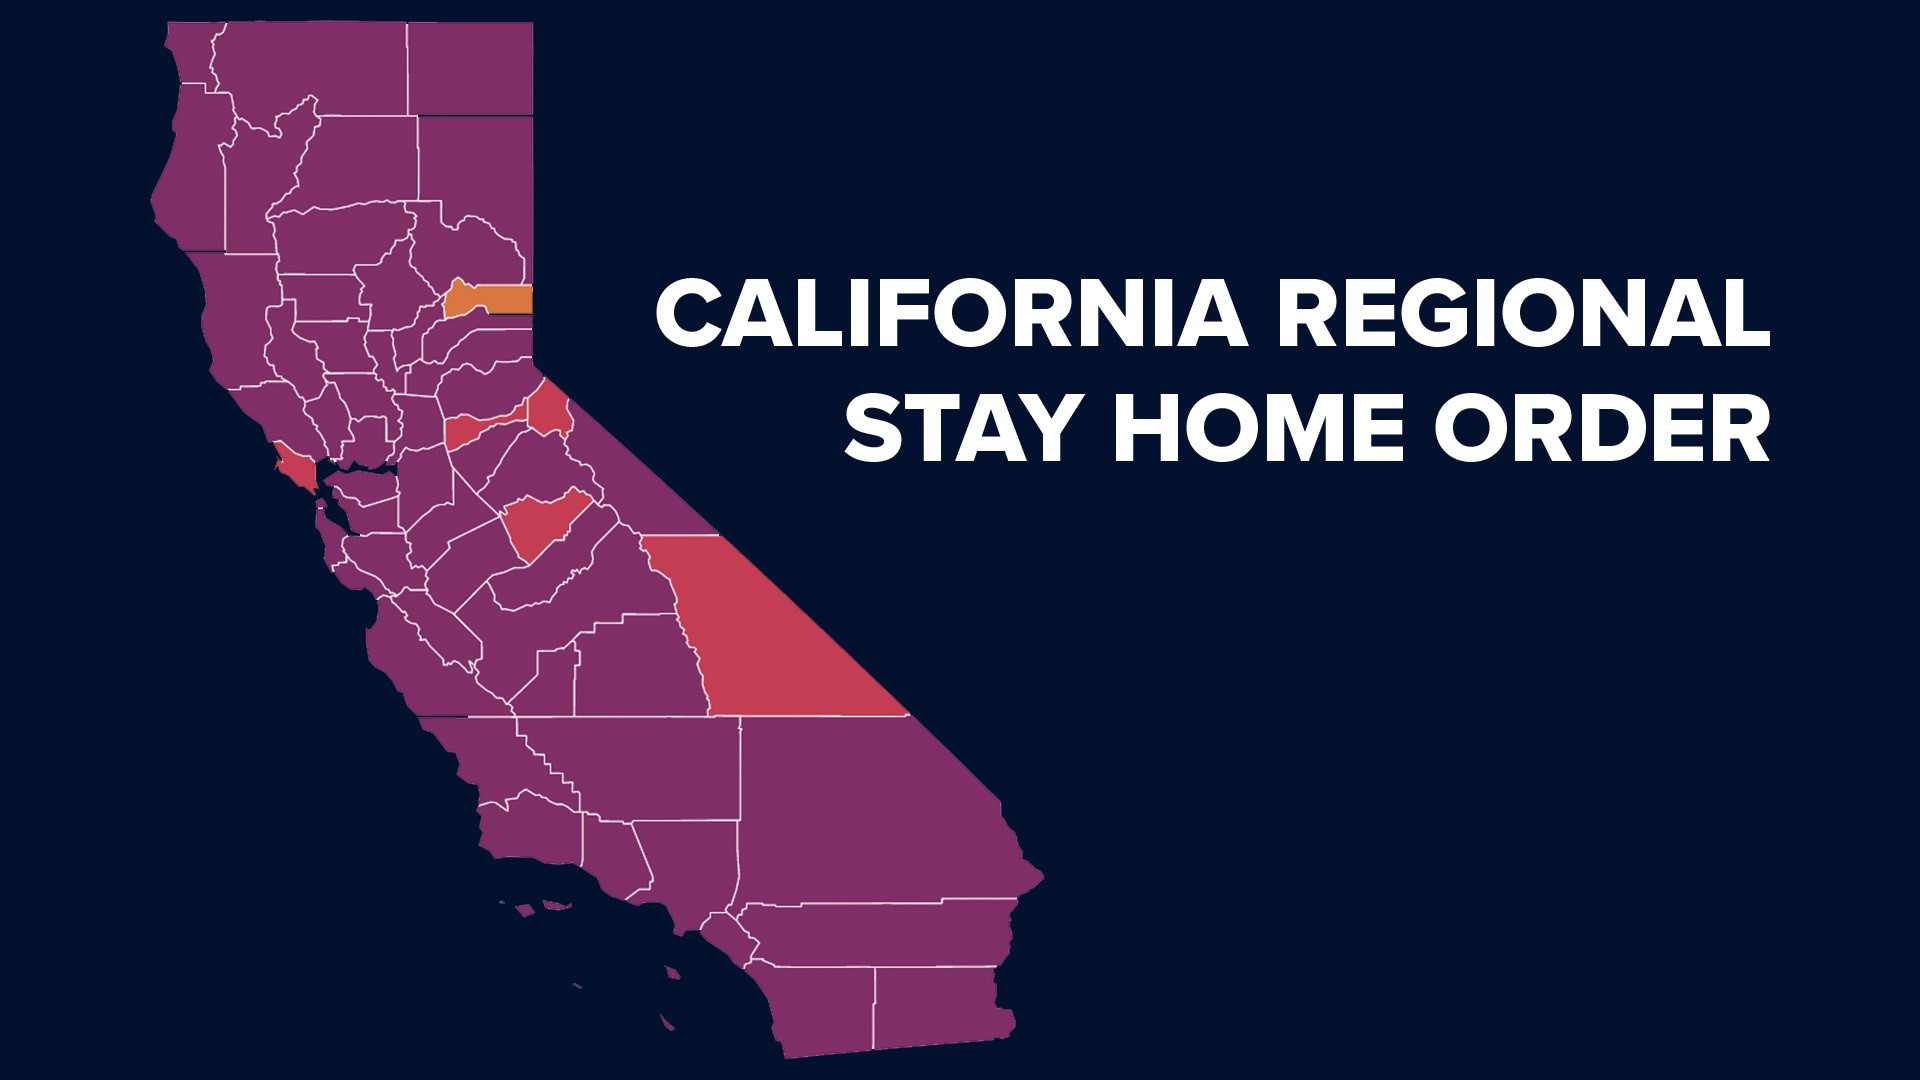 Gov. Newsom announced new stay-at-home rules on Thursday that will trigger when a region’s intensive care unit capacity falls below 15%.